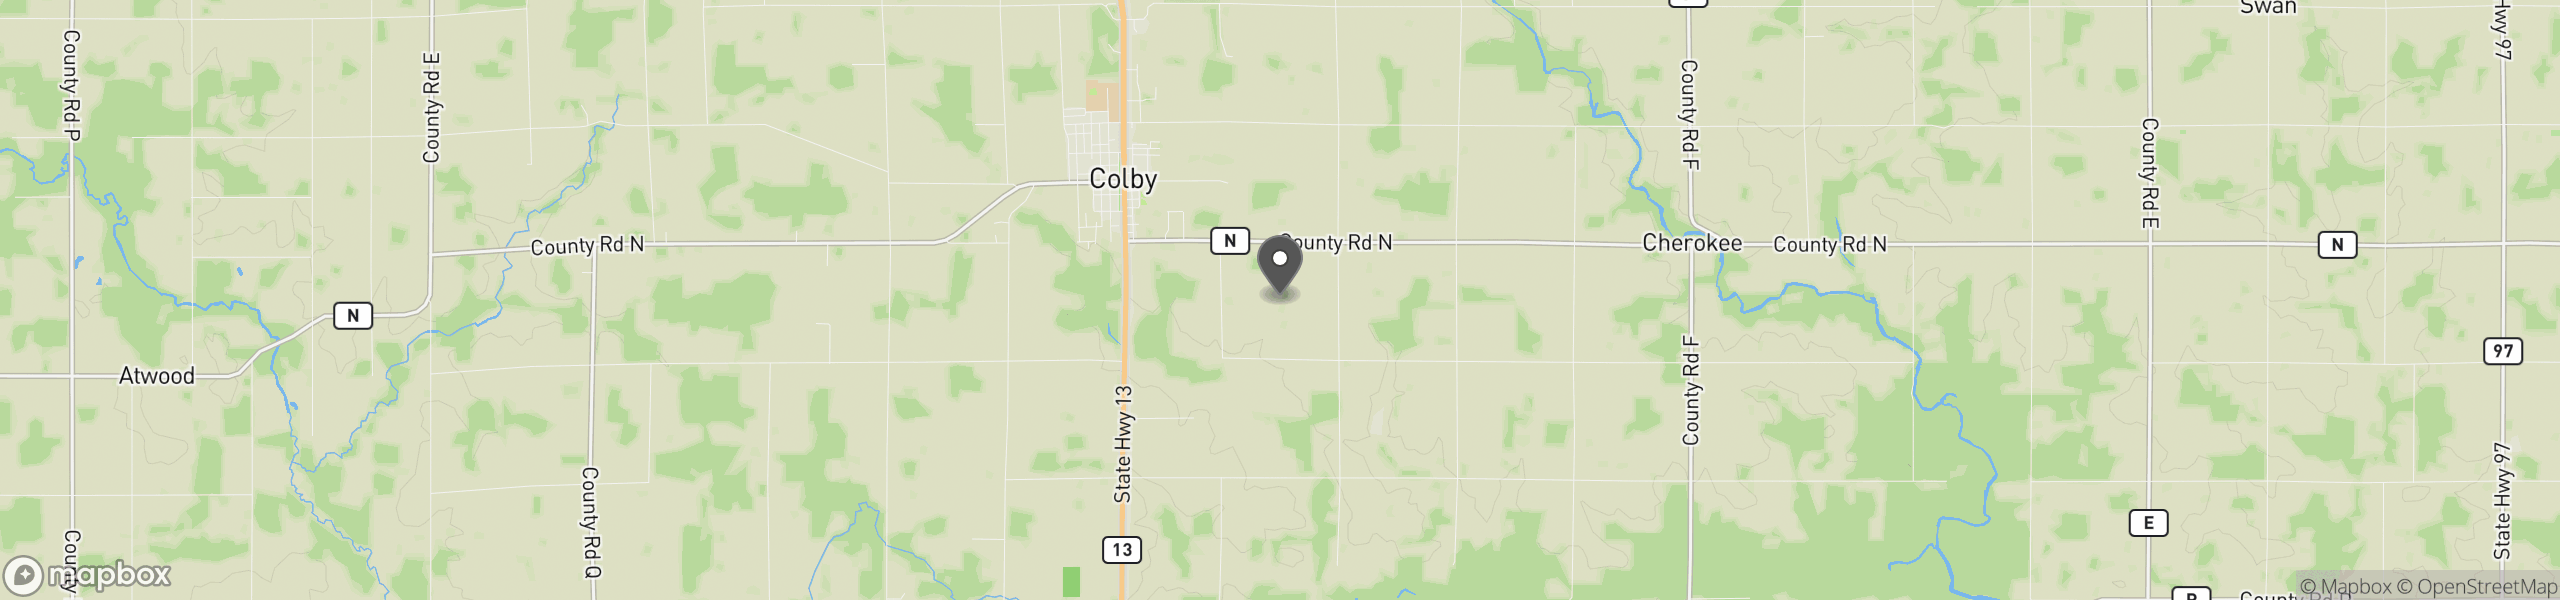 Colby, WI 54421